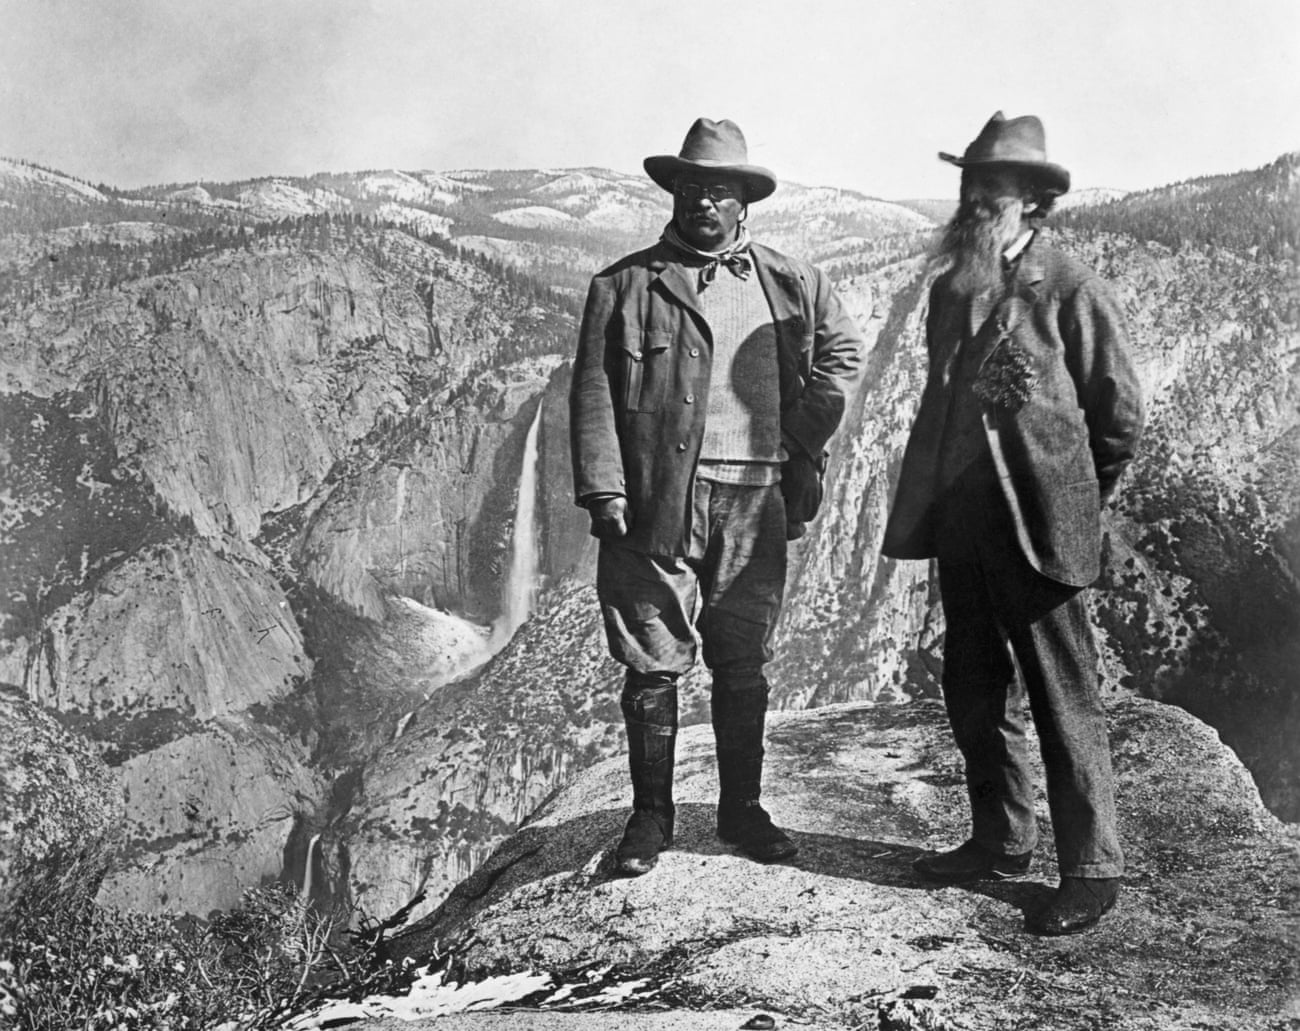 Theodore Roosevelt and John Muir above Yosemite Valley. Muir complained about the ‘uncleanliness’ of Native Americans.